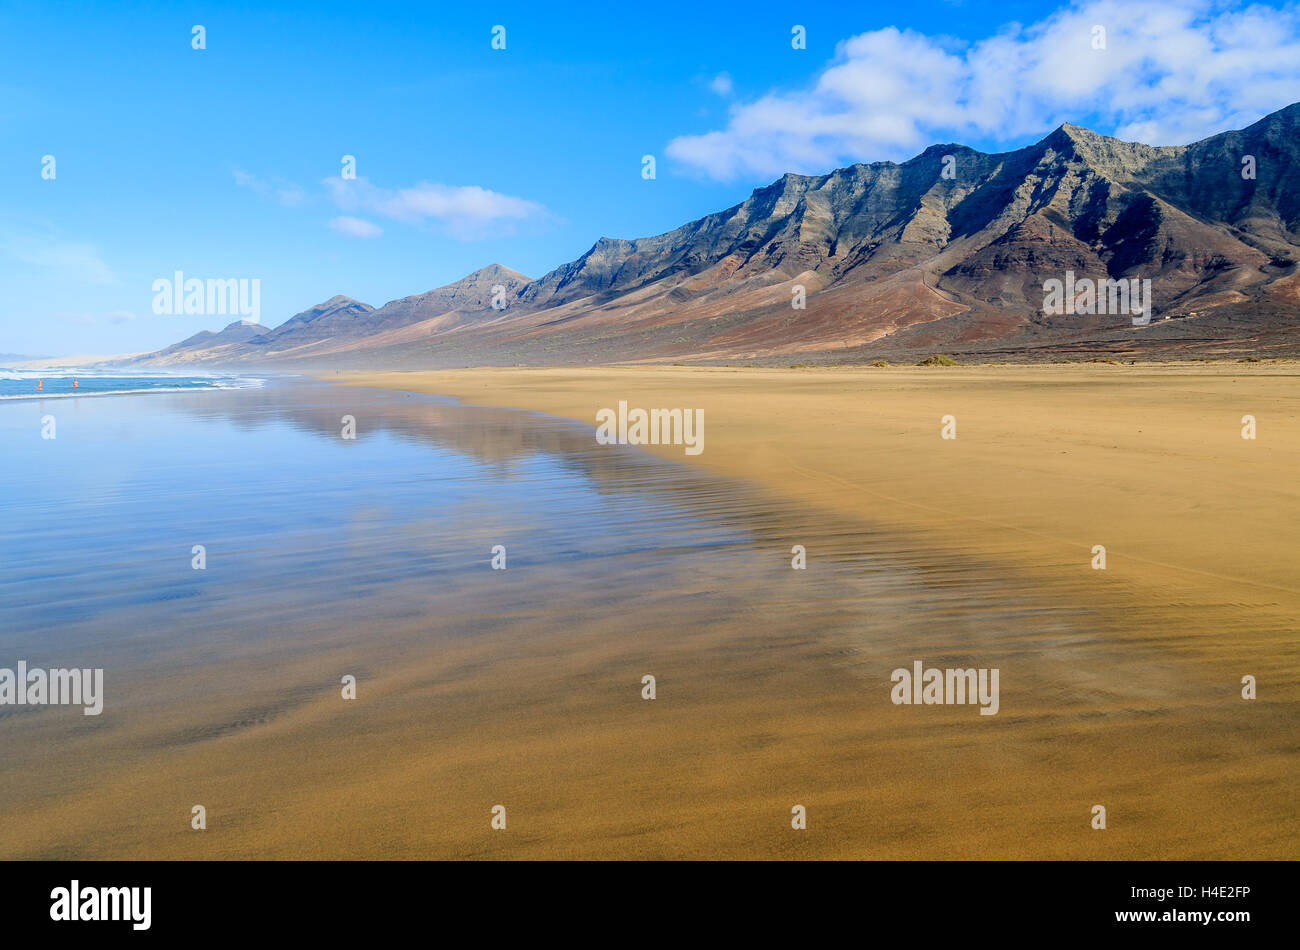 Reflection of mountains in wet sand on Cofete beach in secluded part of Fuerteventura, Canary Islands, Spain Stock Photo